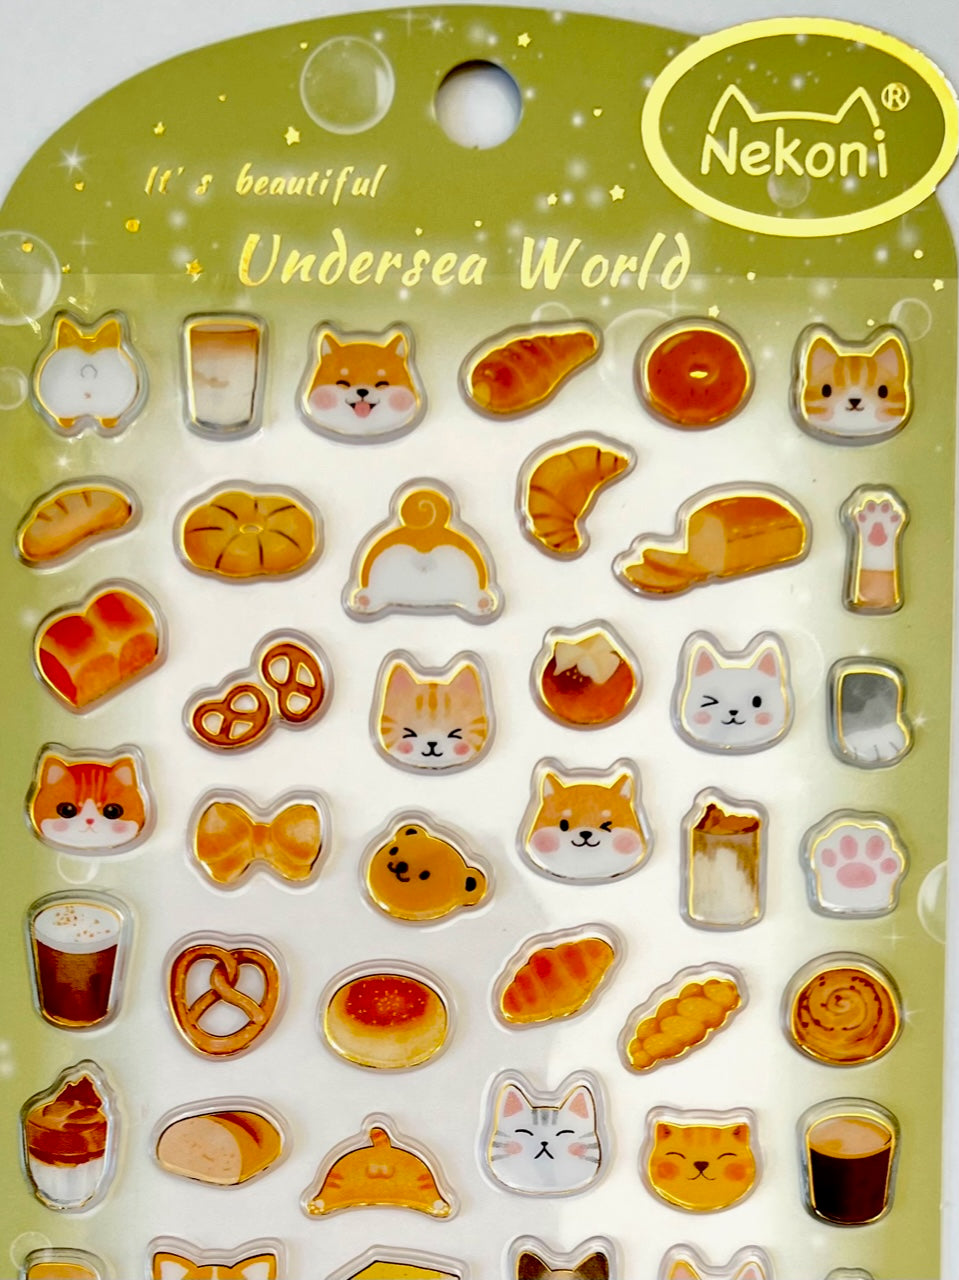 X 51128 PETS AND BREAD STICKERS-DISCONTINUED